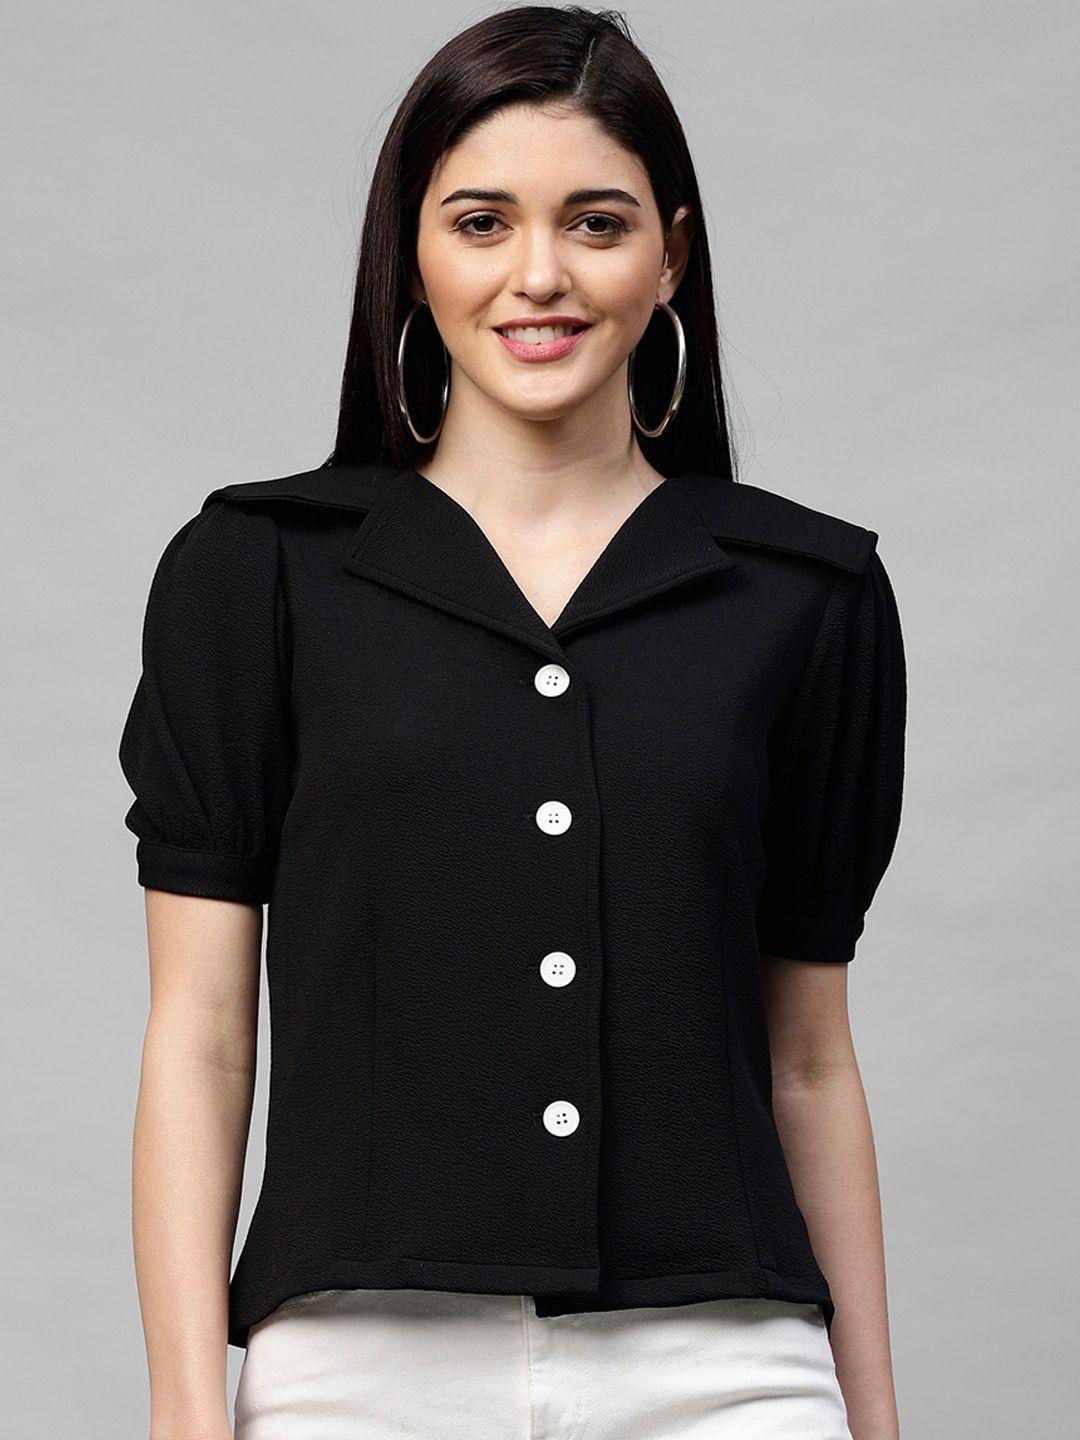 athena-women-black-solid-shirt-style-top